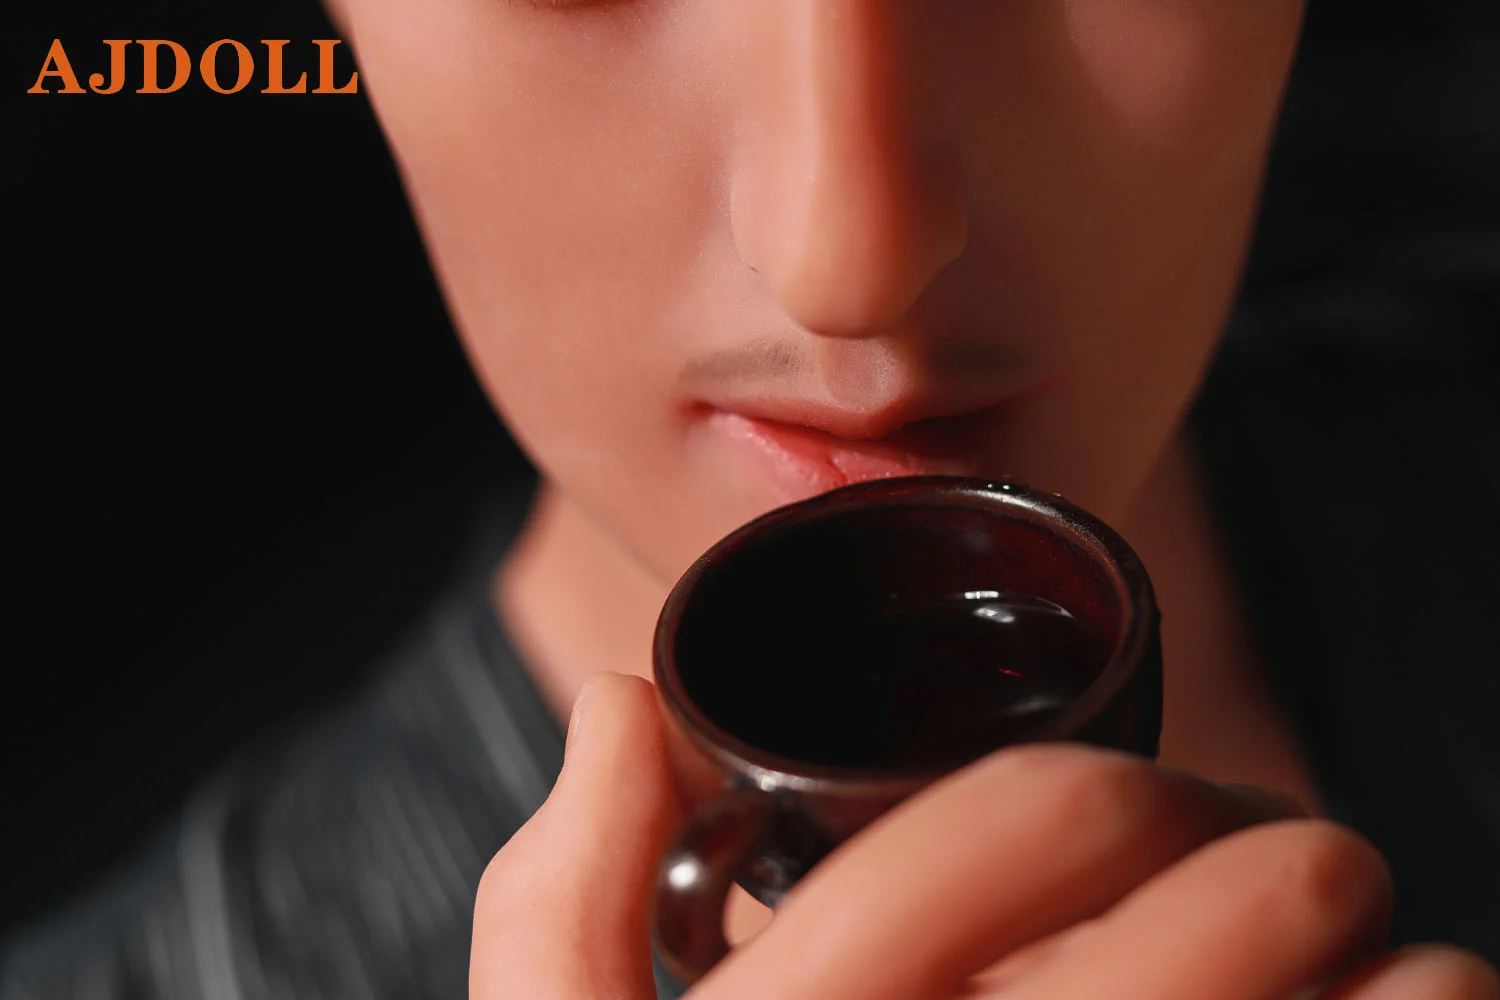 Male sex doll holding tea cup in hand